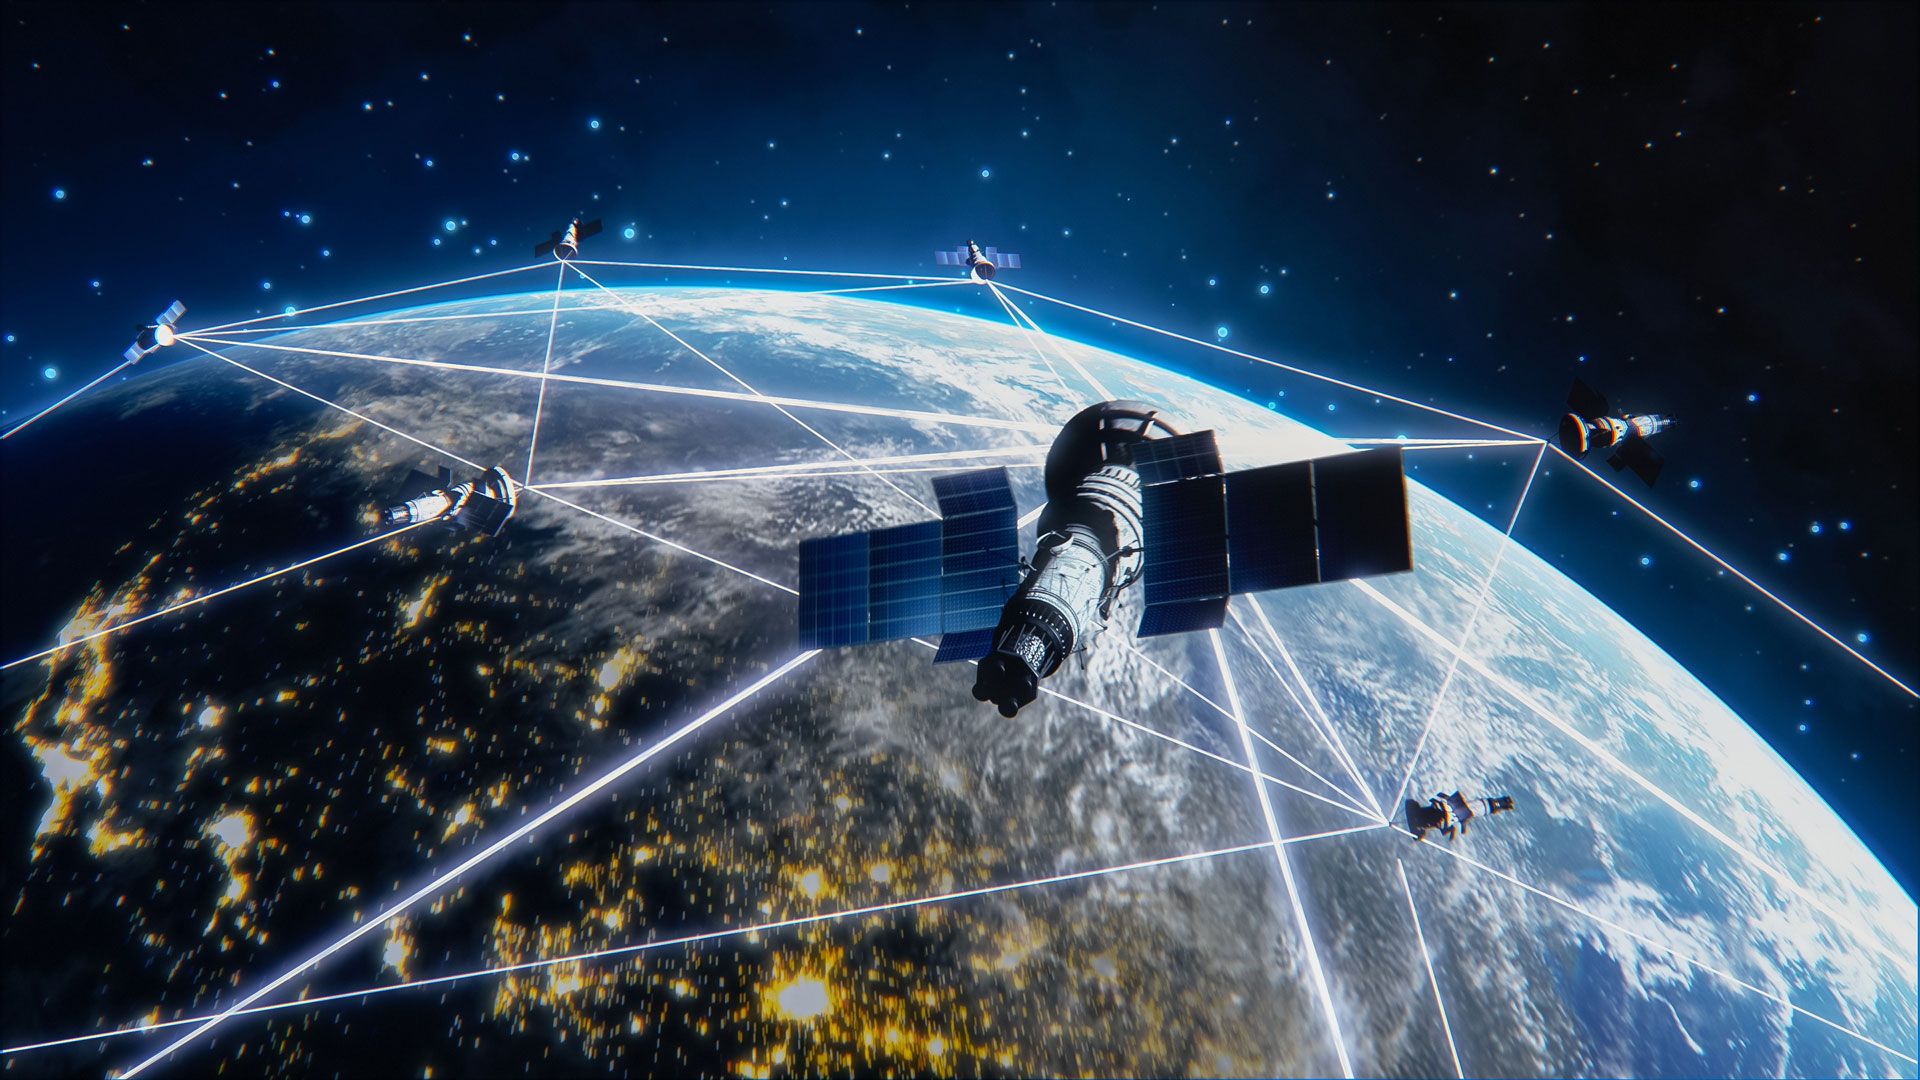 Coordinating satellites for a connected future featured image